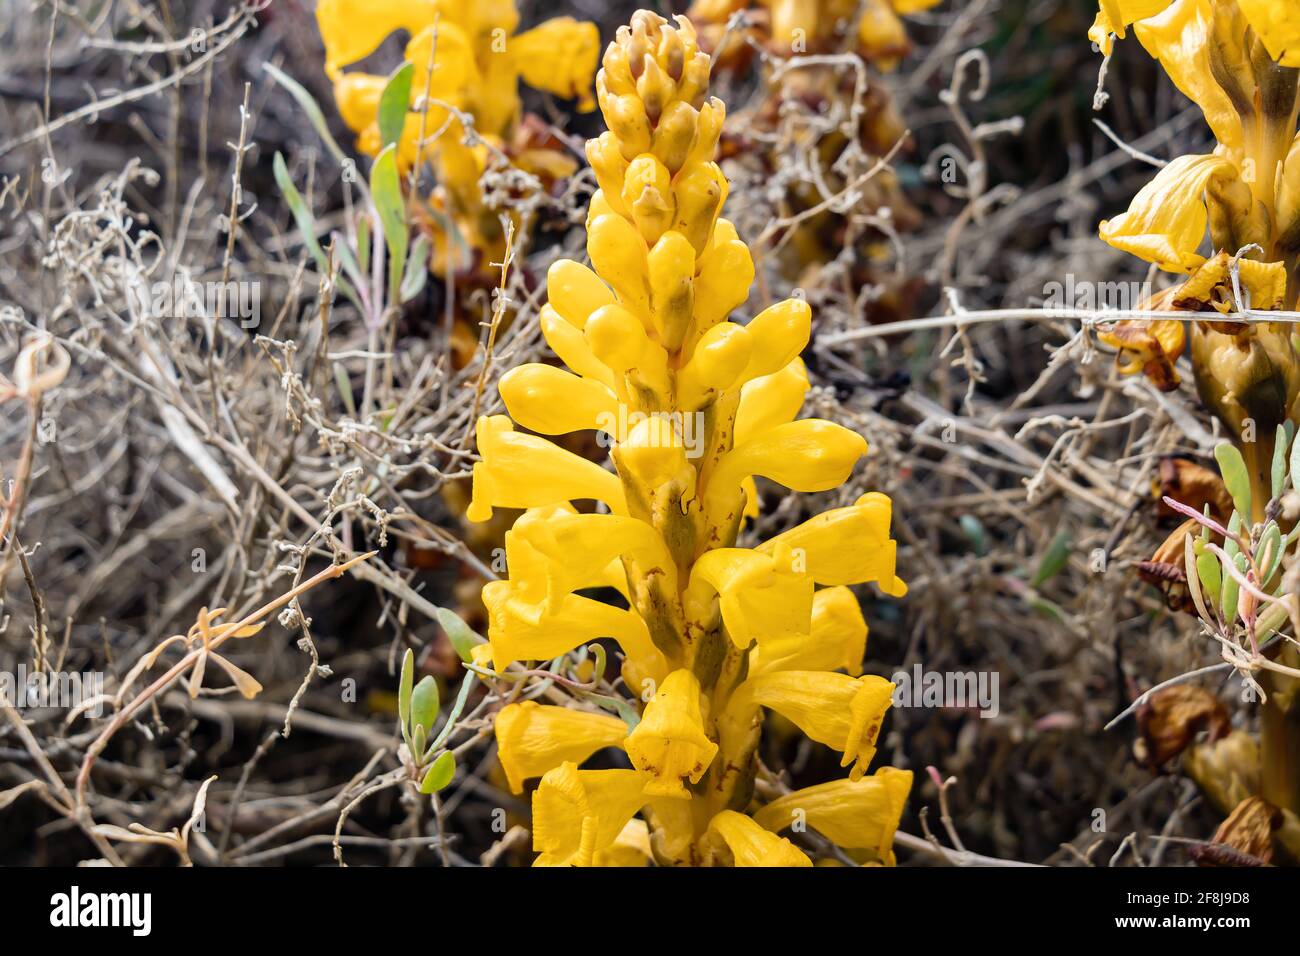 Cistanche phelypaea or Cistanche phelipaea is a species of plant in the family Orobanchaceae. It has a wide range of distribution from the Arabian Pen Stock Photo